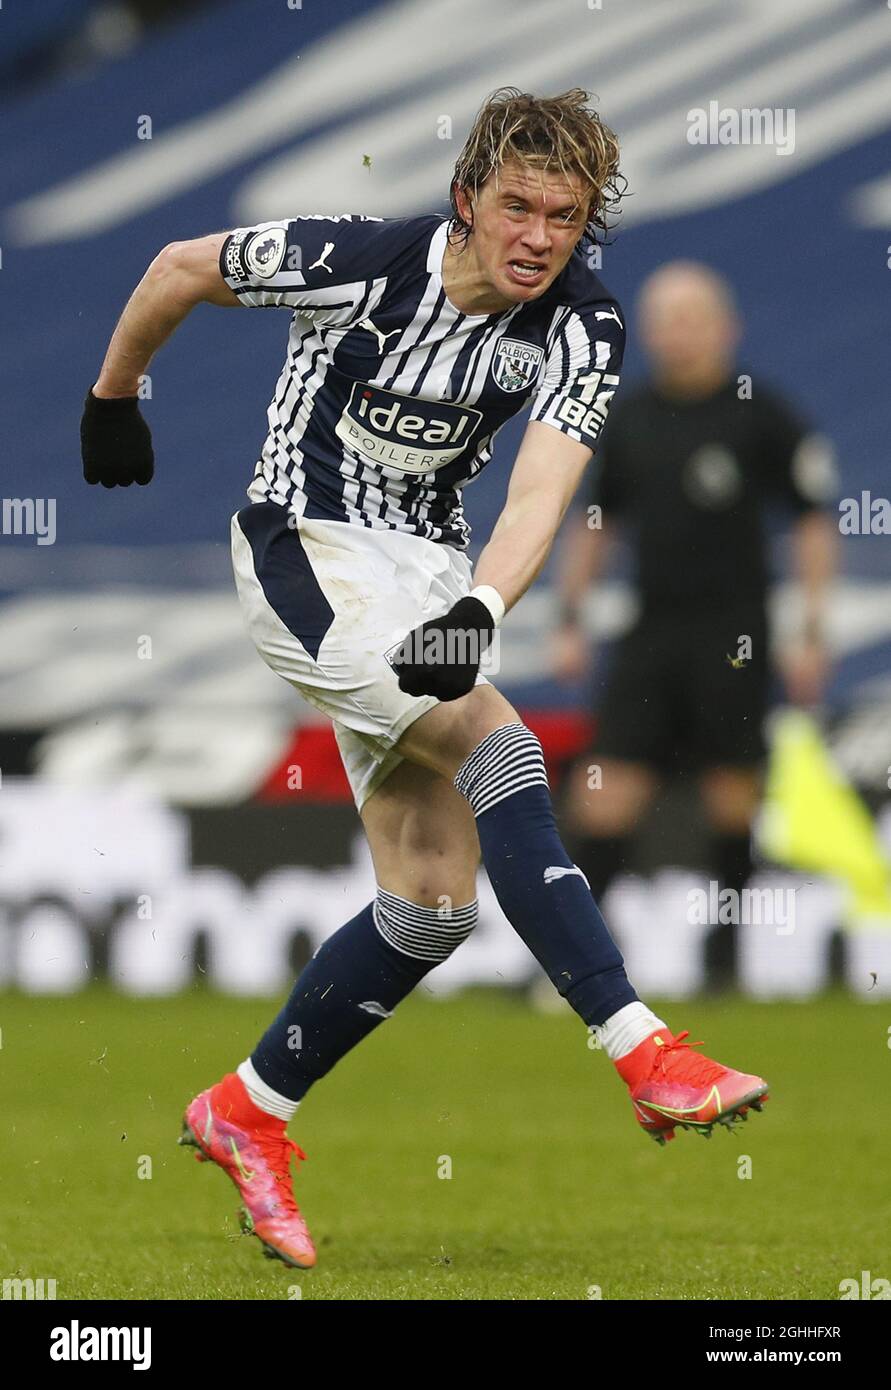 Conor Gallagher of West Bromwich Albion during the Premier League match at The Hawthorns, West Bromwich. Picture date: 14th February 2021. Picture credit should read: Darren Staples/Sportimage via PA Images Stock Photo